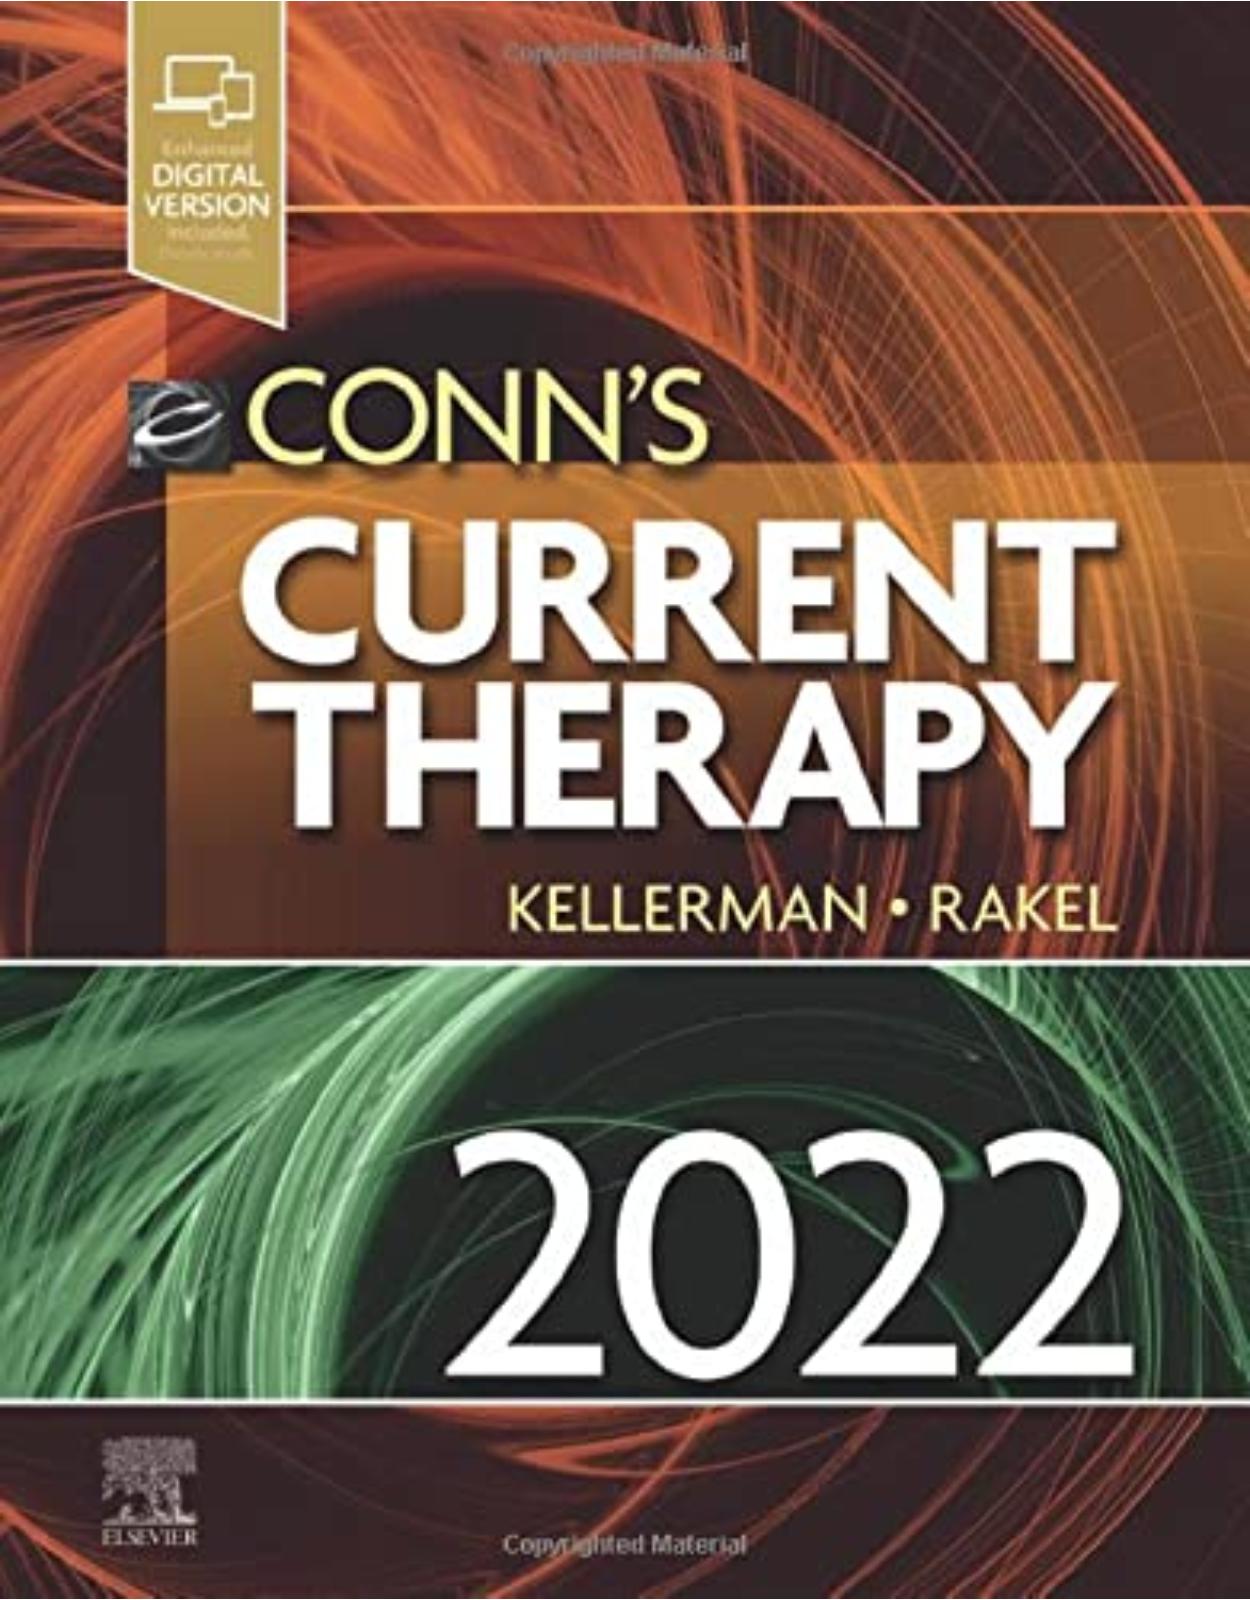 Conn's Current Therapy 2022